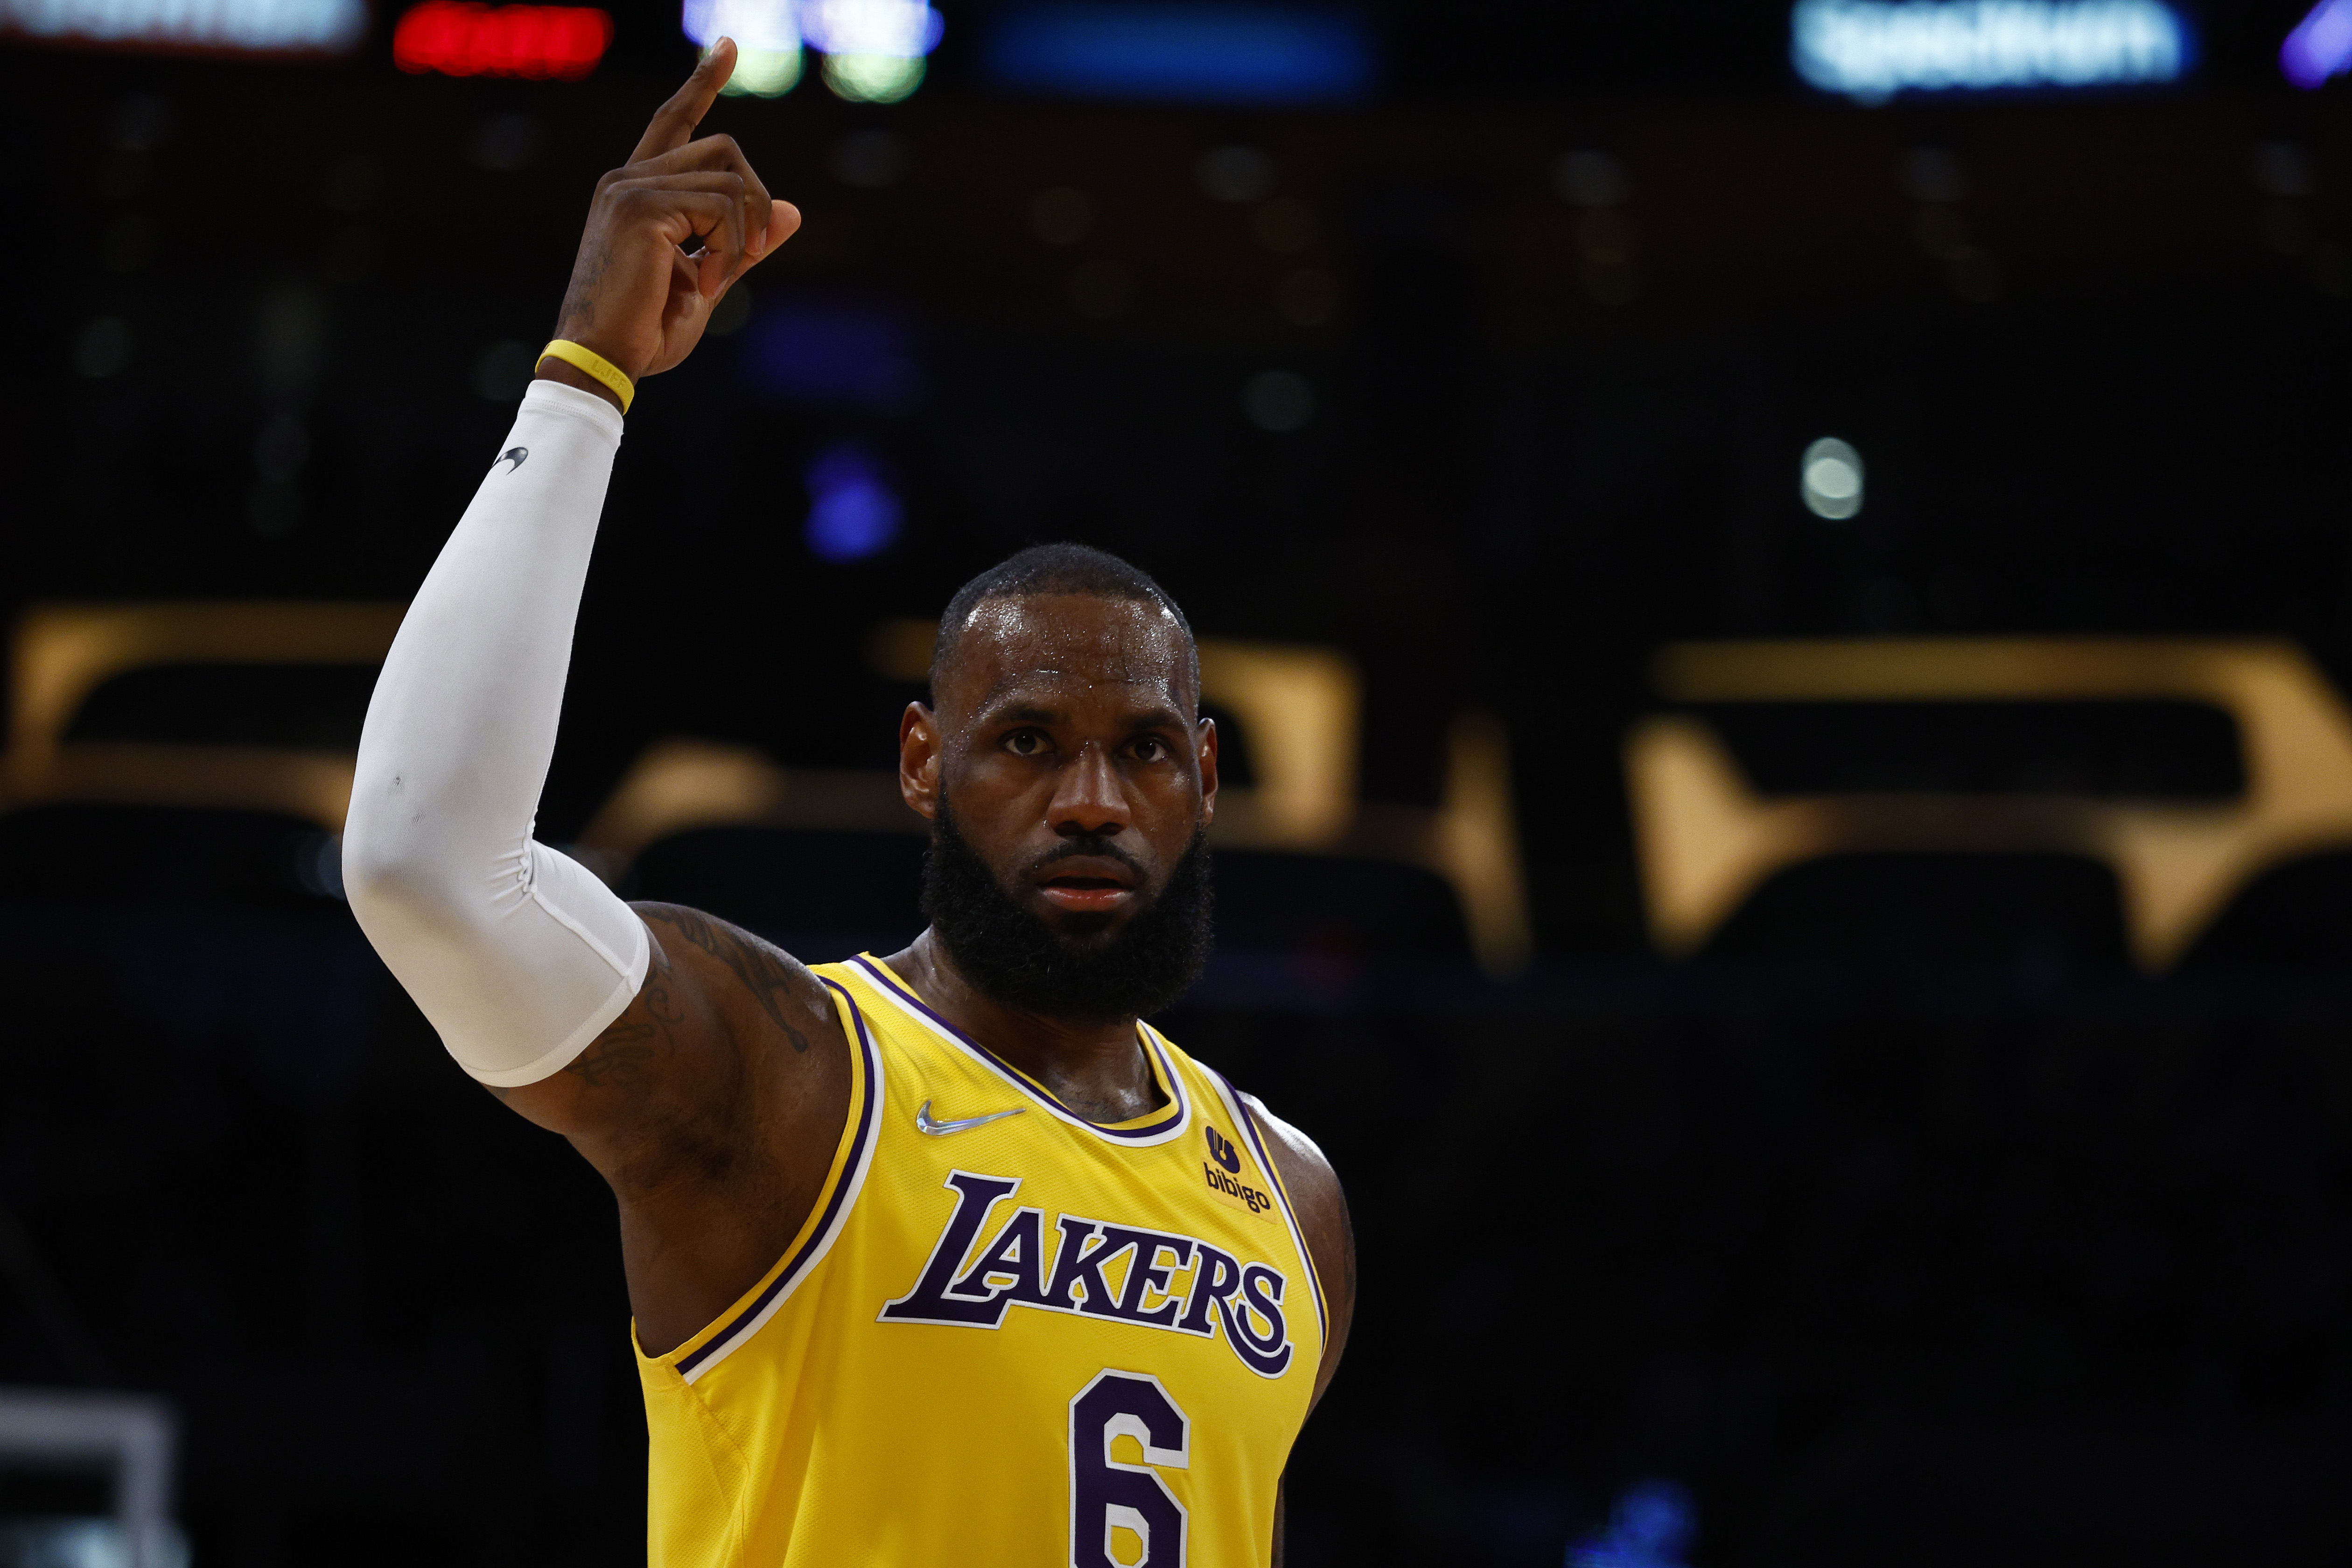 Los Angeles Lakers star LeBron James reacts during an NBA game in March 2022